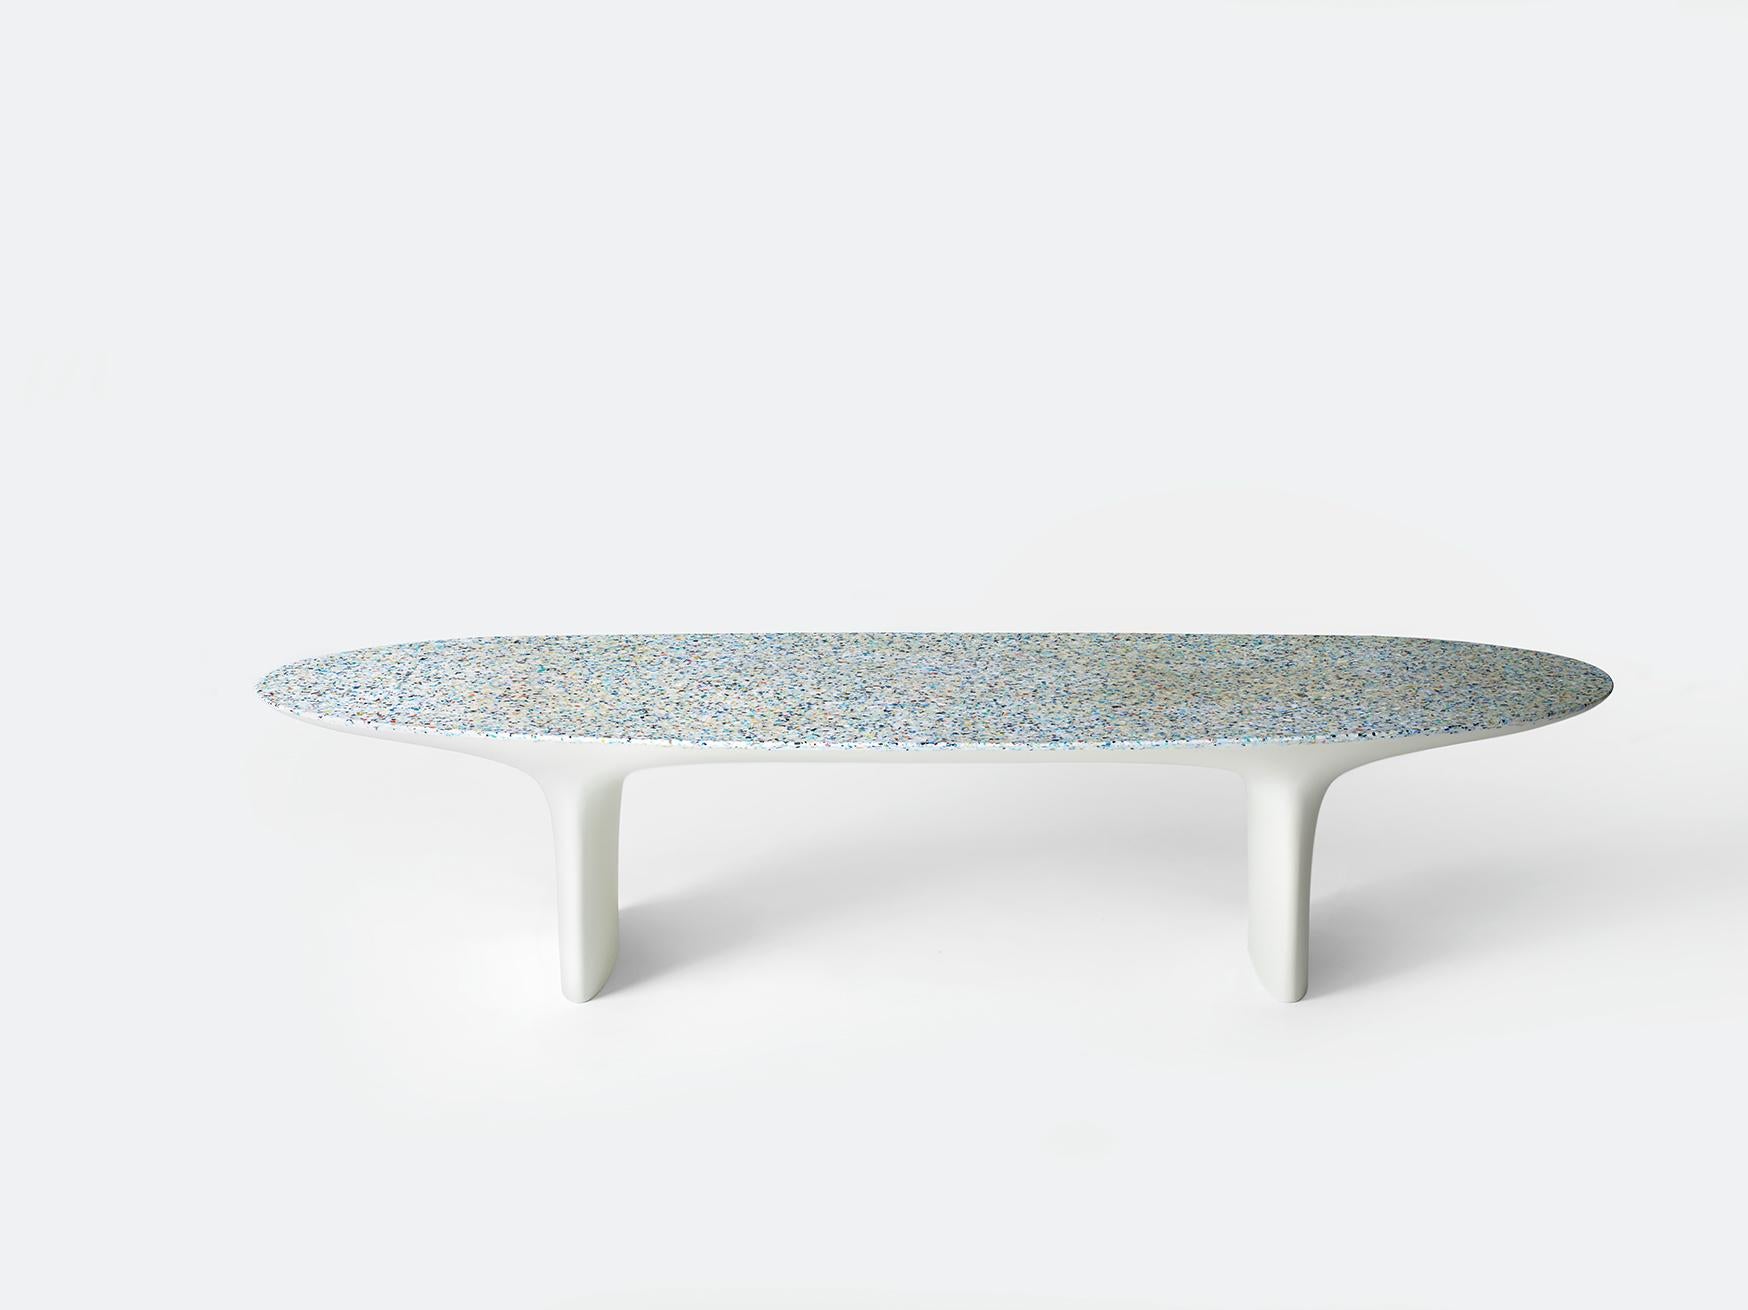 Resin Flotsam, White Cast Recycled Ocean Plastic Terrazzo Bench Seat by Brodie Neill For Sale